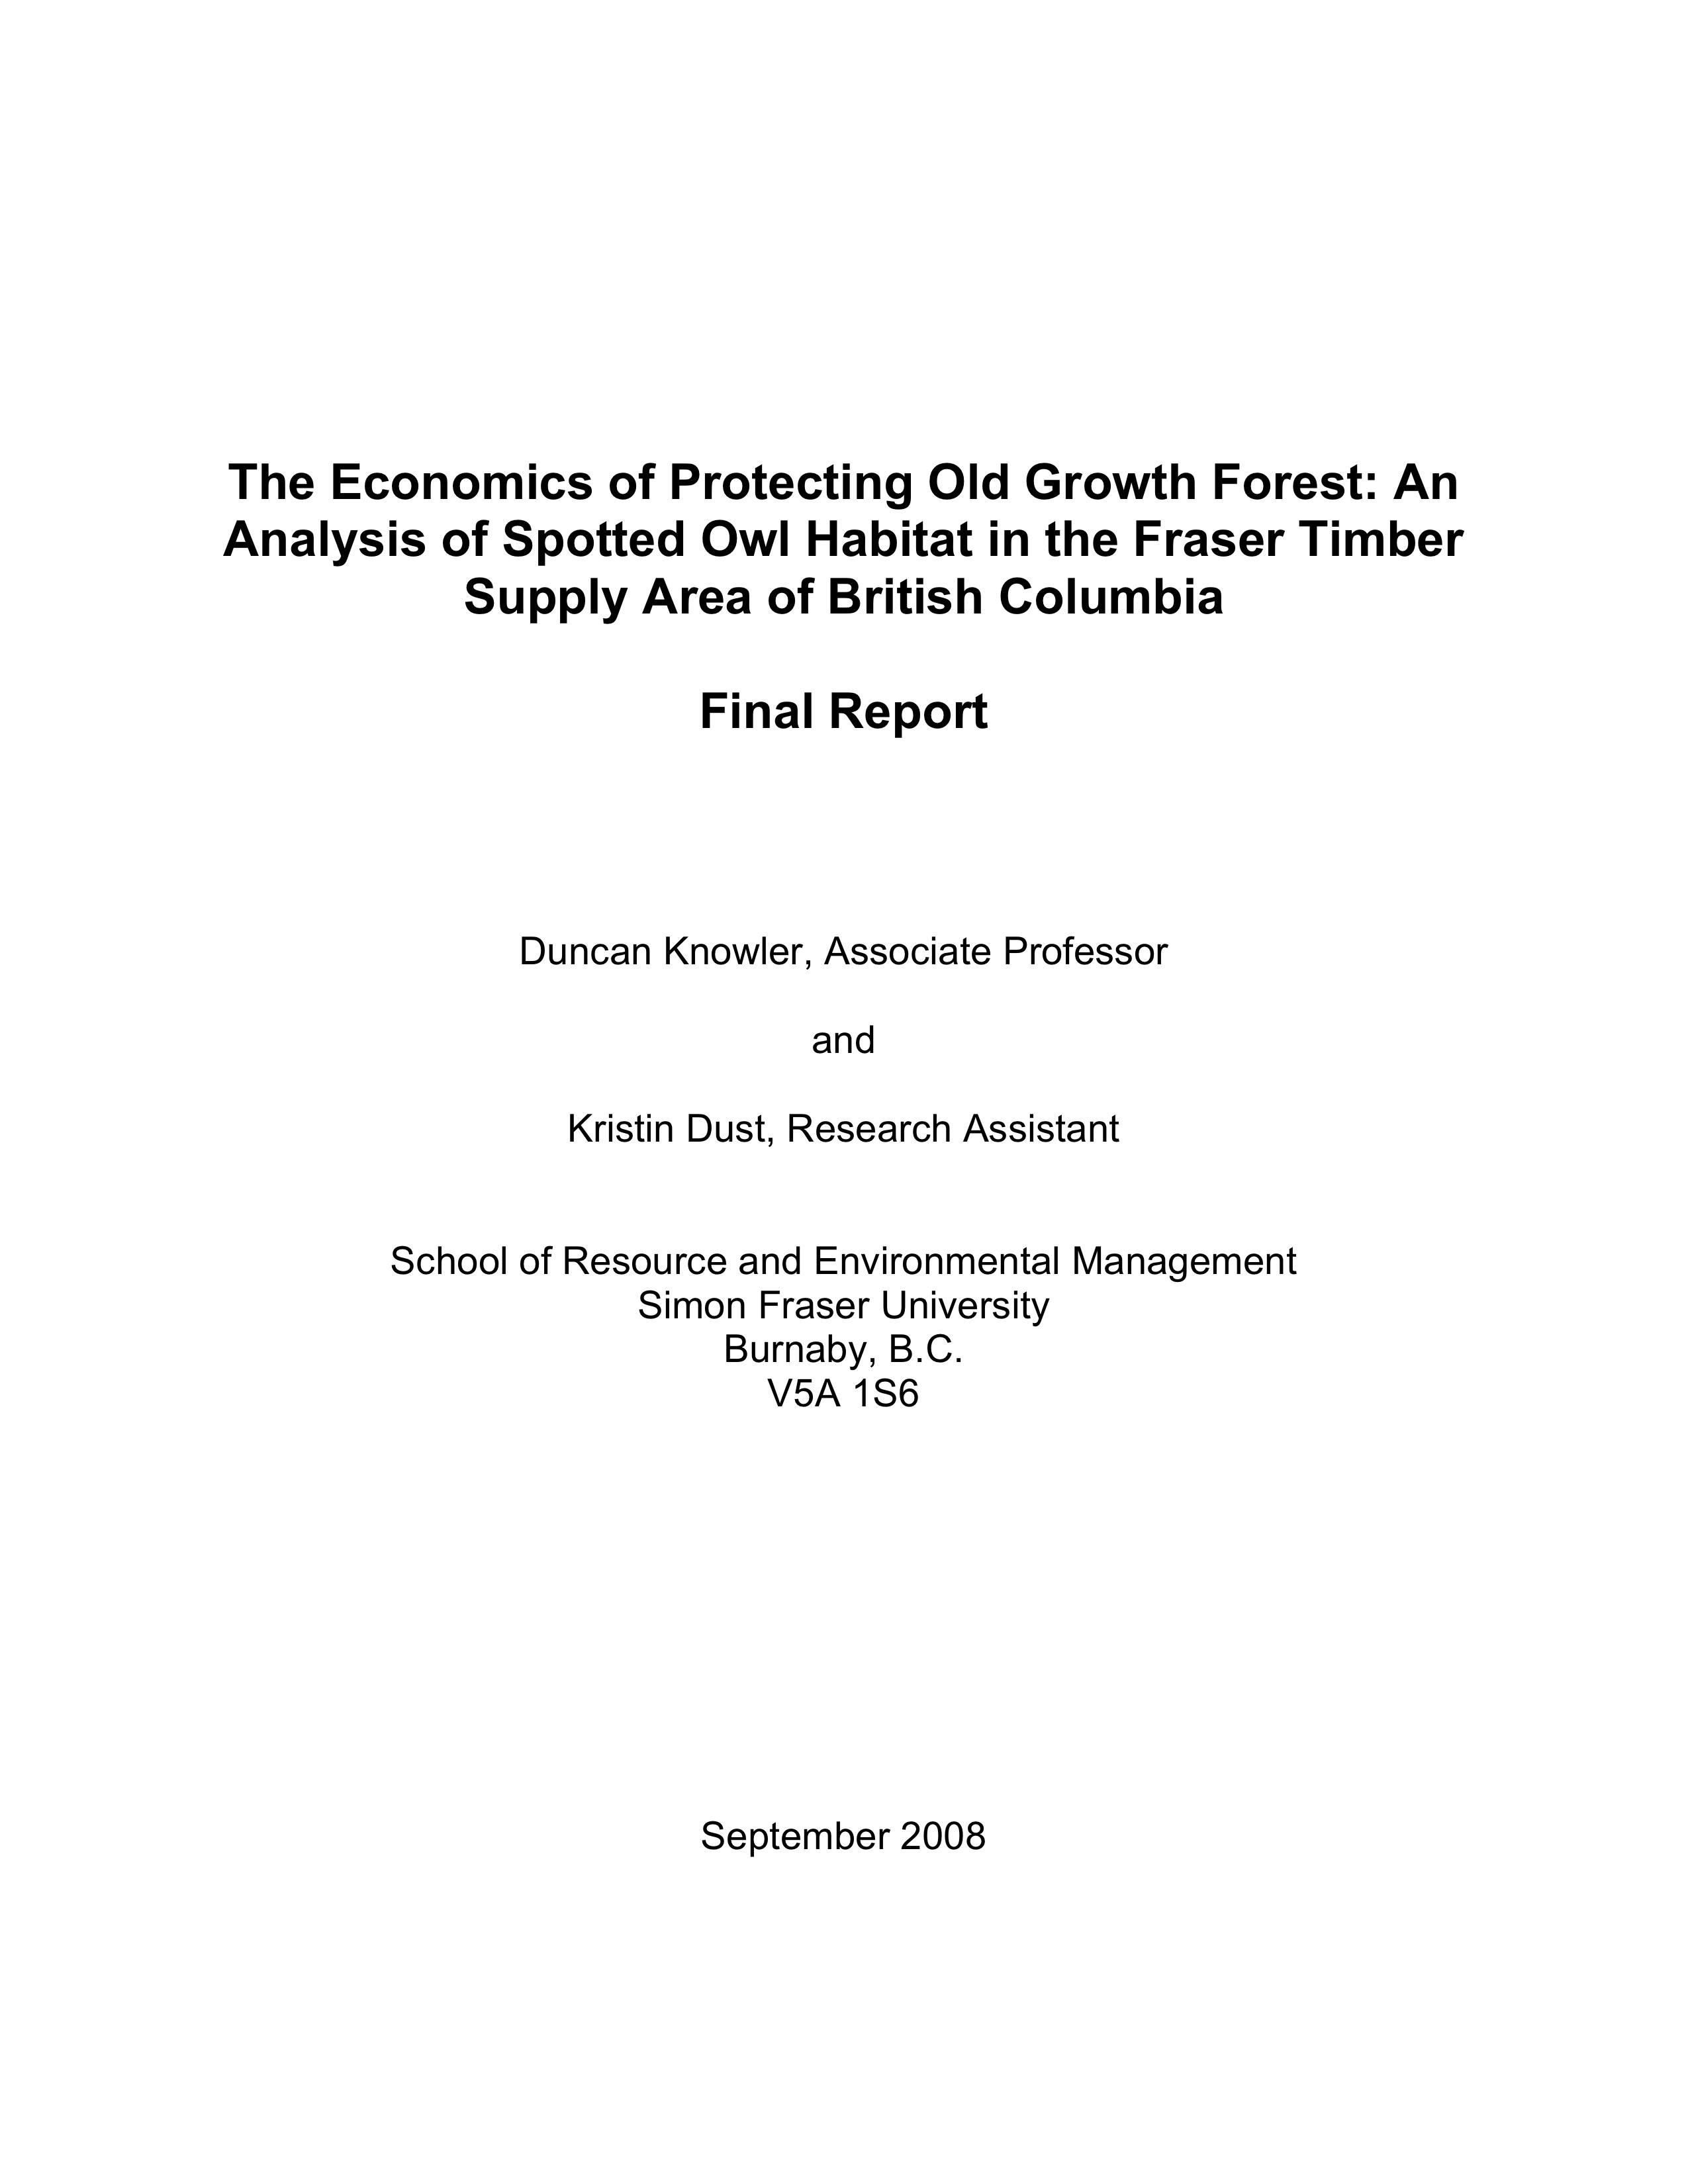 The Economics of Protecting Old Growth Forest: An Analysis of Spotted Owl Habitat in the Fraser Timber Supply Area of British Columbia